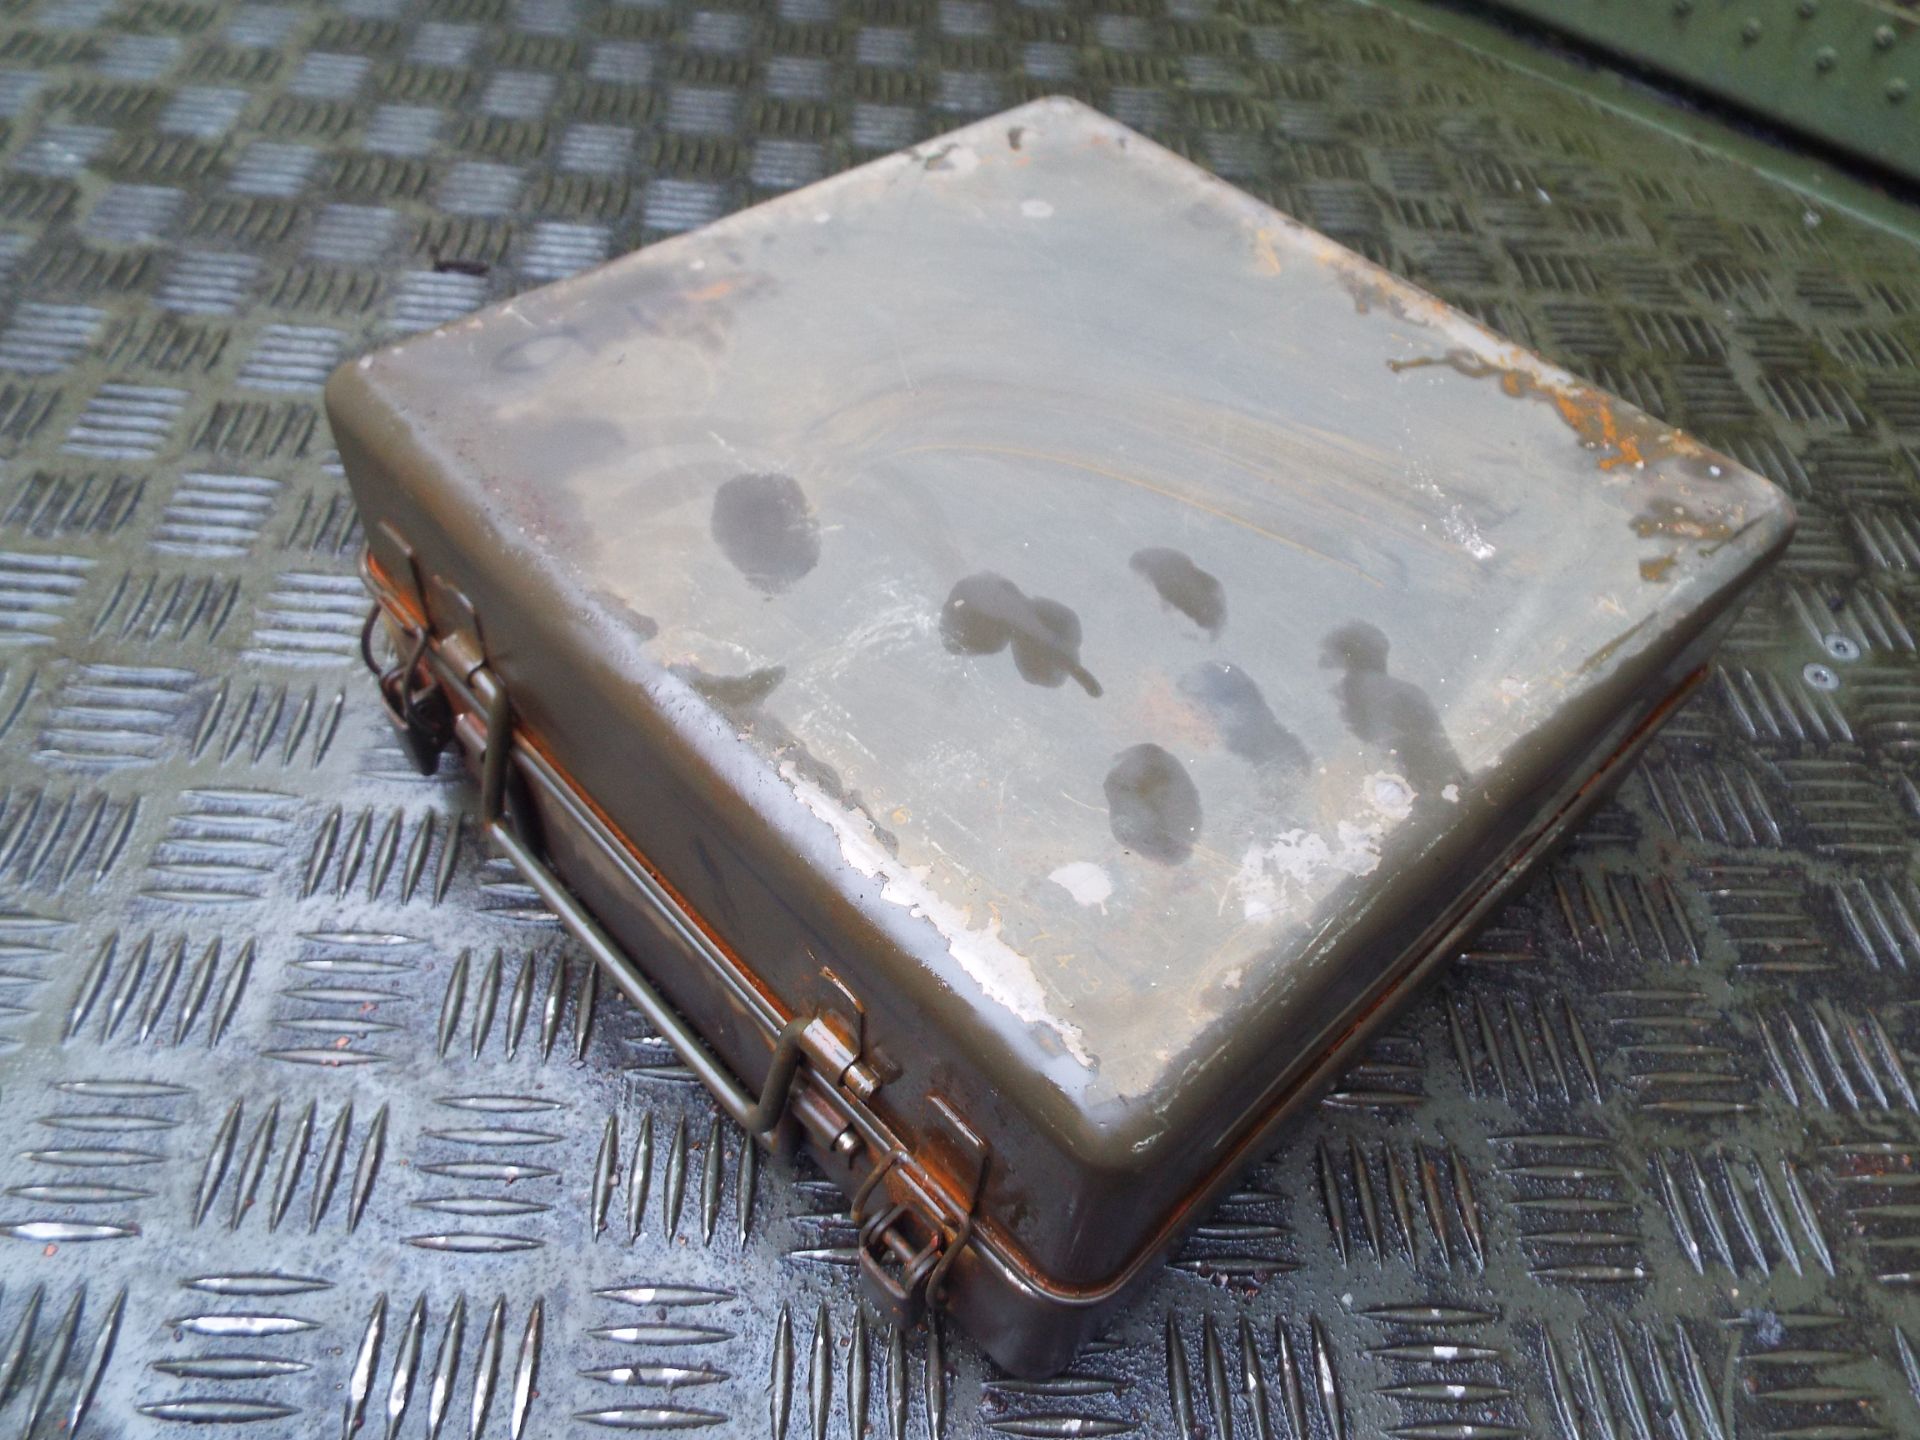 No. 12 Stove, Diesel Cooker/Camping Stove - Image 5 of 5